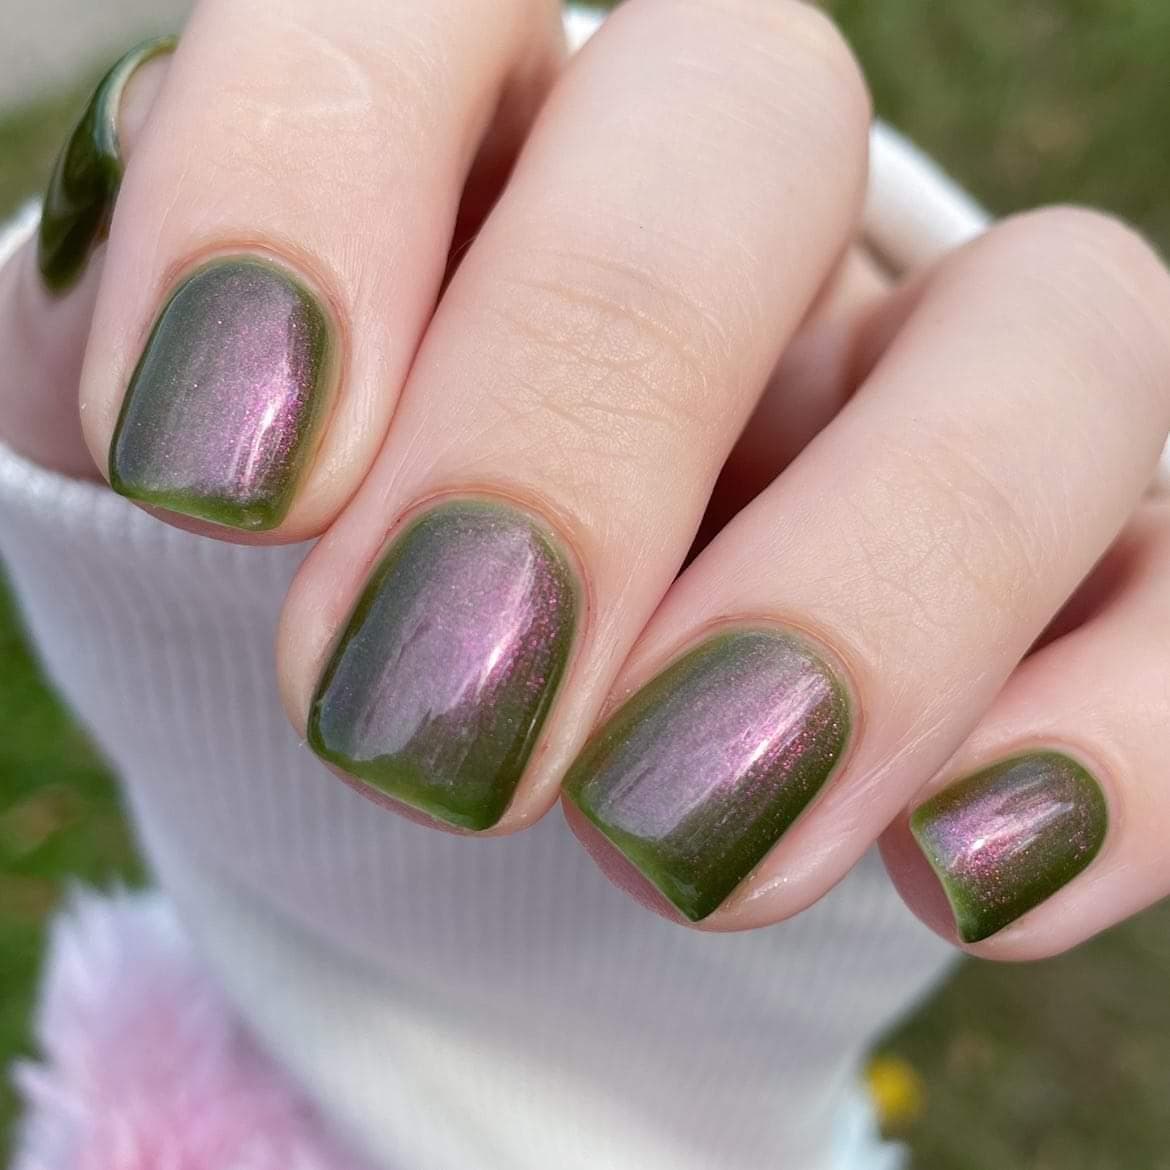 Matcha Latte Nails Are the Creamy New Mani Trend Taking Over